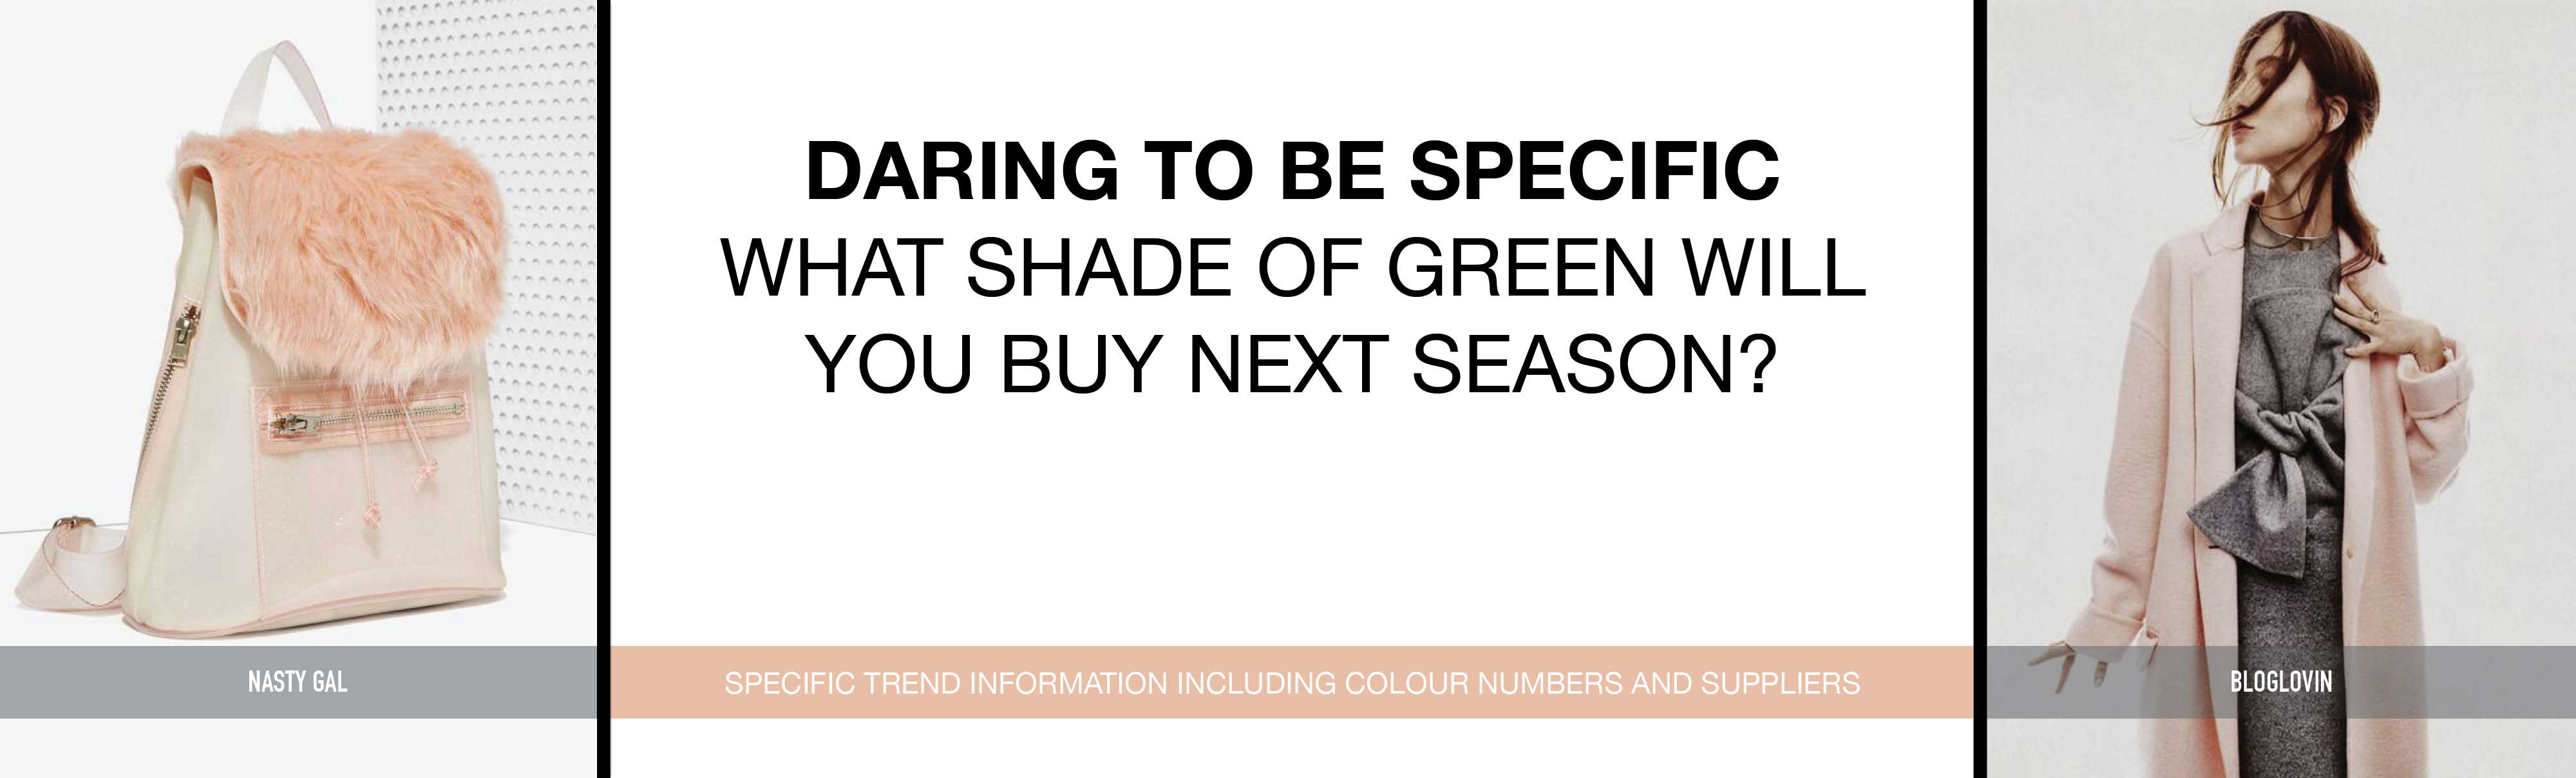 Daring to be specific - What shade of green will you buy next season?